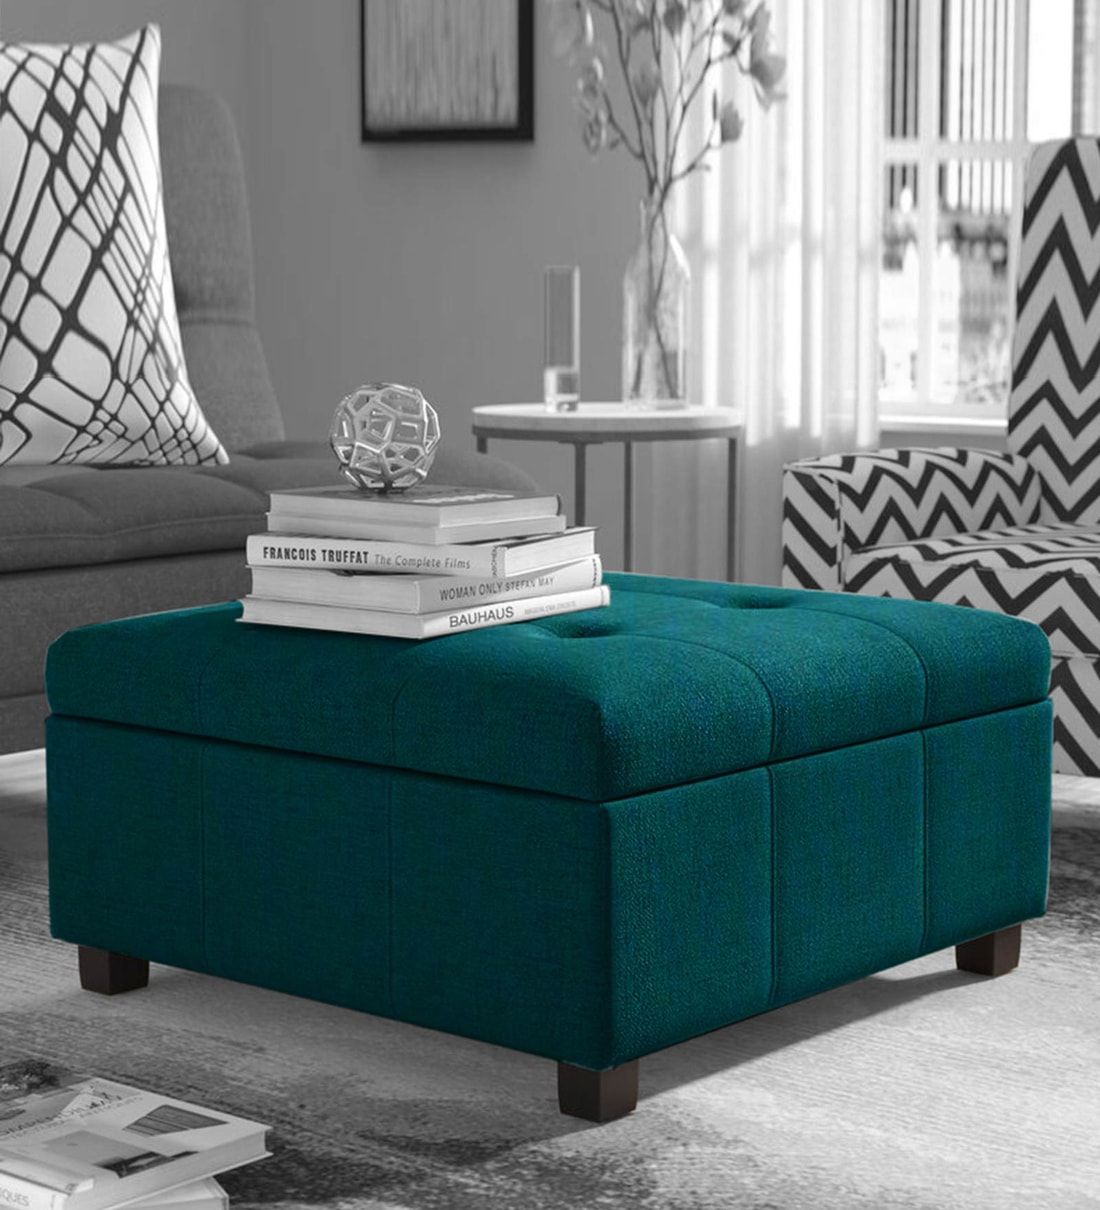 Buy Mubila Ottoman In Sea Green Colourfebonic Online – Ottomans –  Seating – Furniture – Pepperfry Product Intended For Dark Green Ottomans (View 7 of 15)